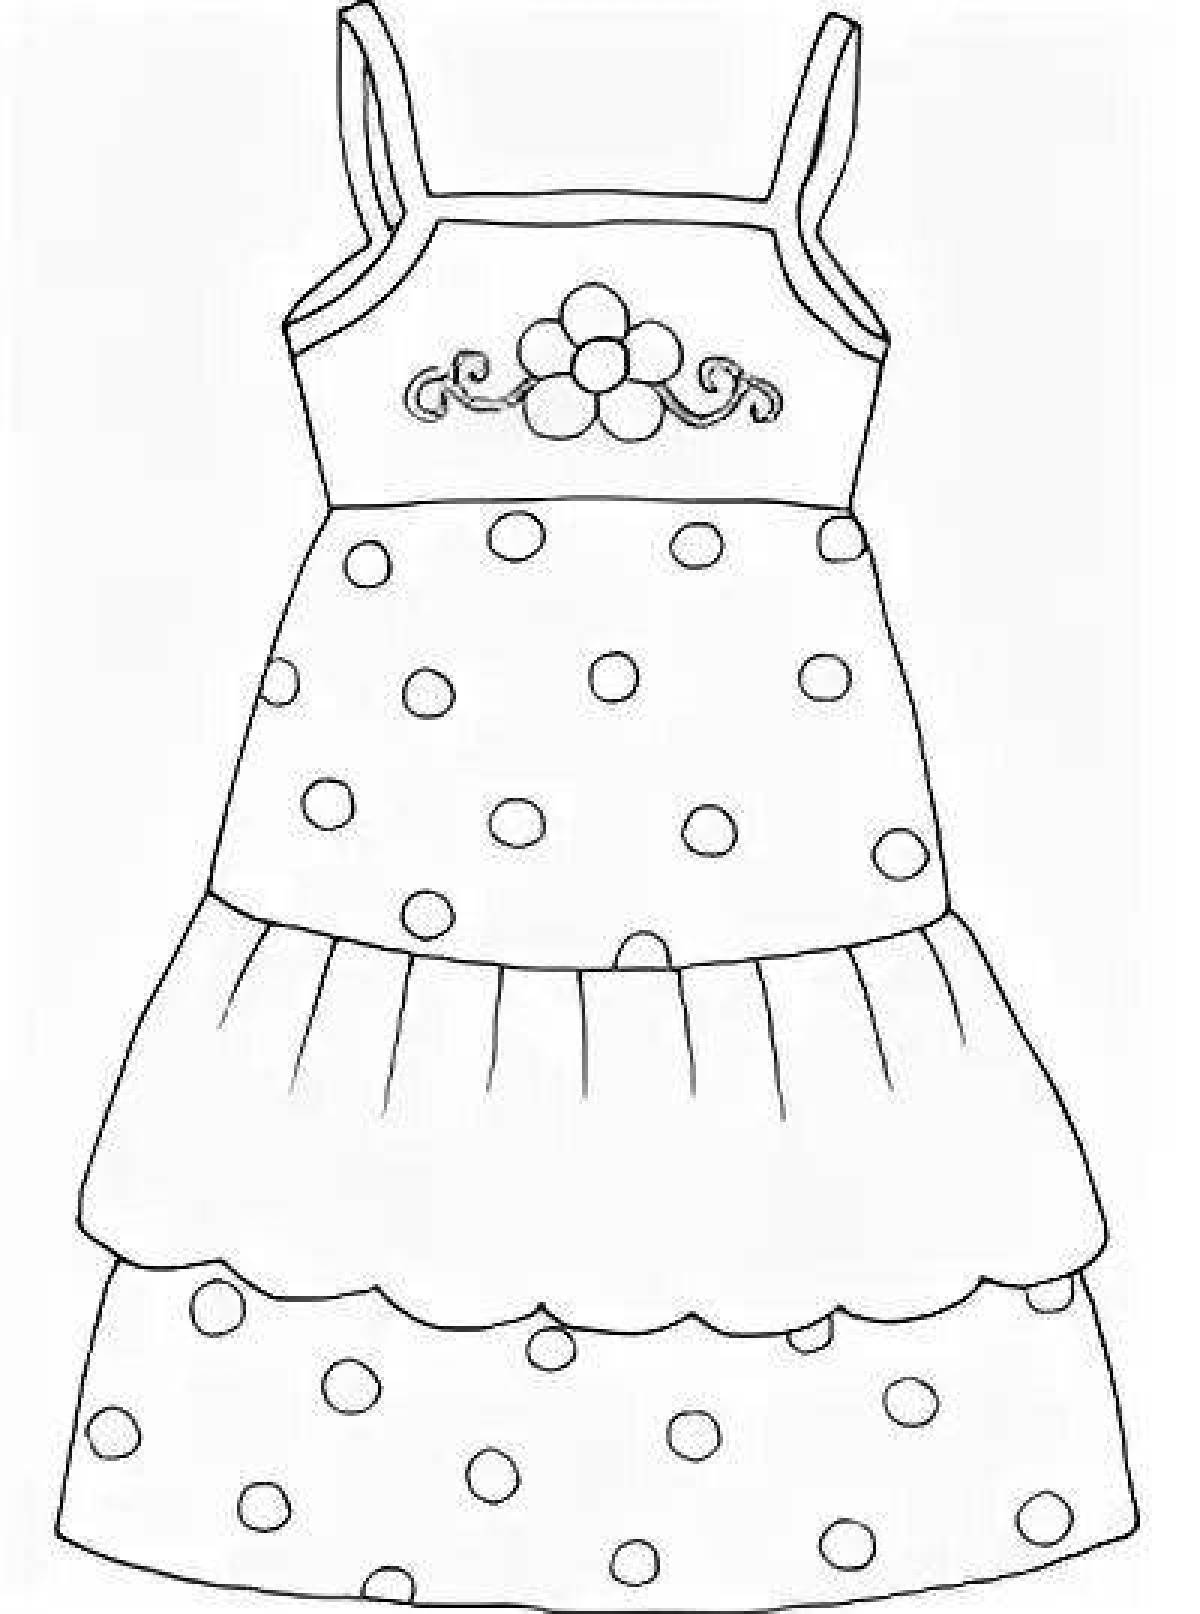 Coloring page gentle sundress